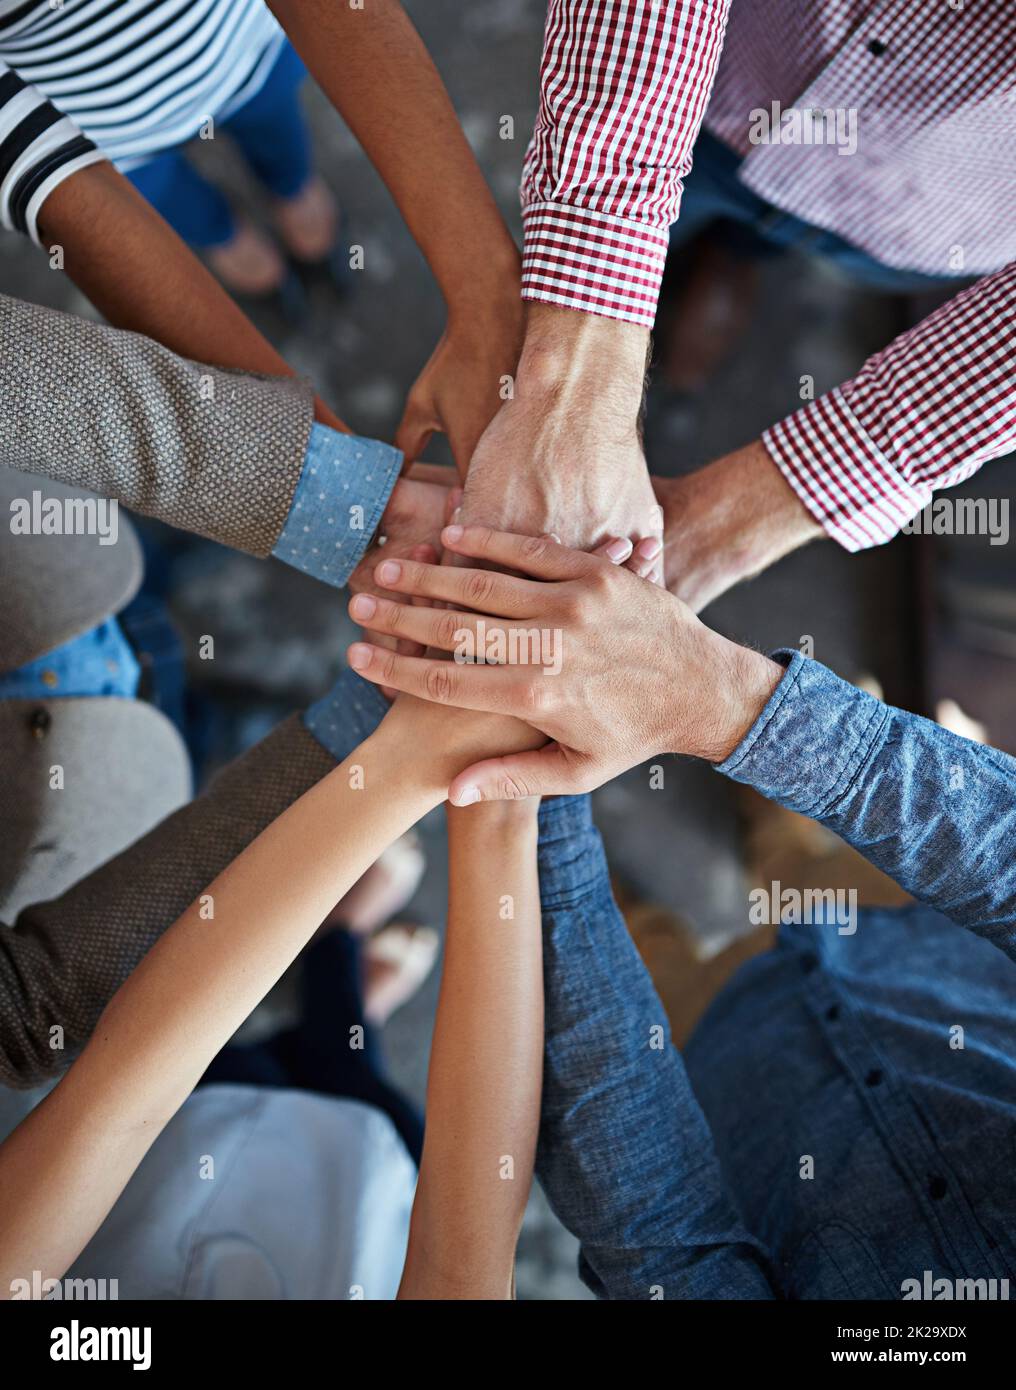 Lets do this team. Modern office space with candid creative business people interacting with each other. Stock Photo